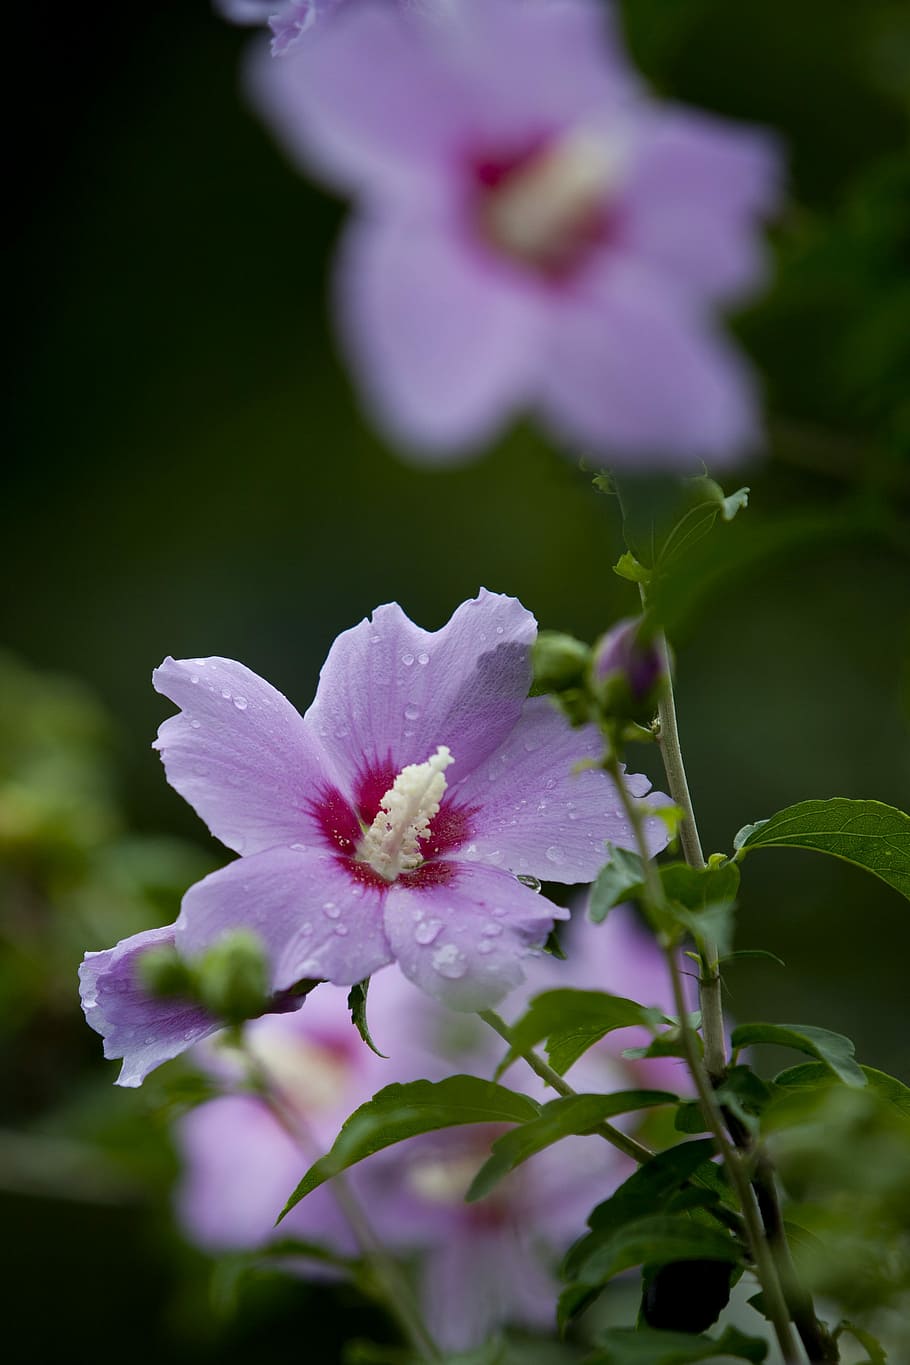 Nature, Plants, Flowers, Tabitha, park, pool, pink, after, rose of sharon, HD wallpaper